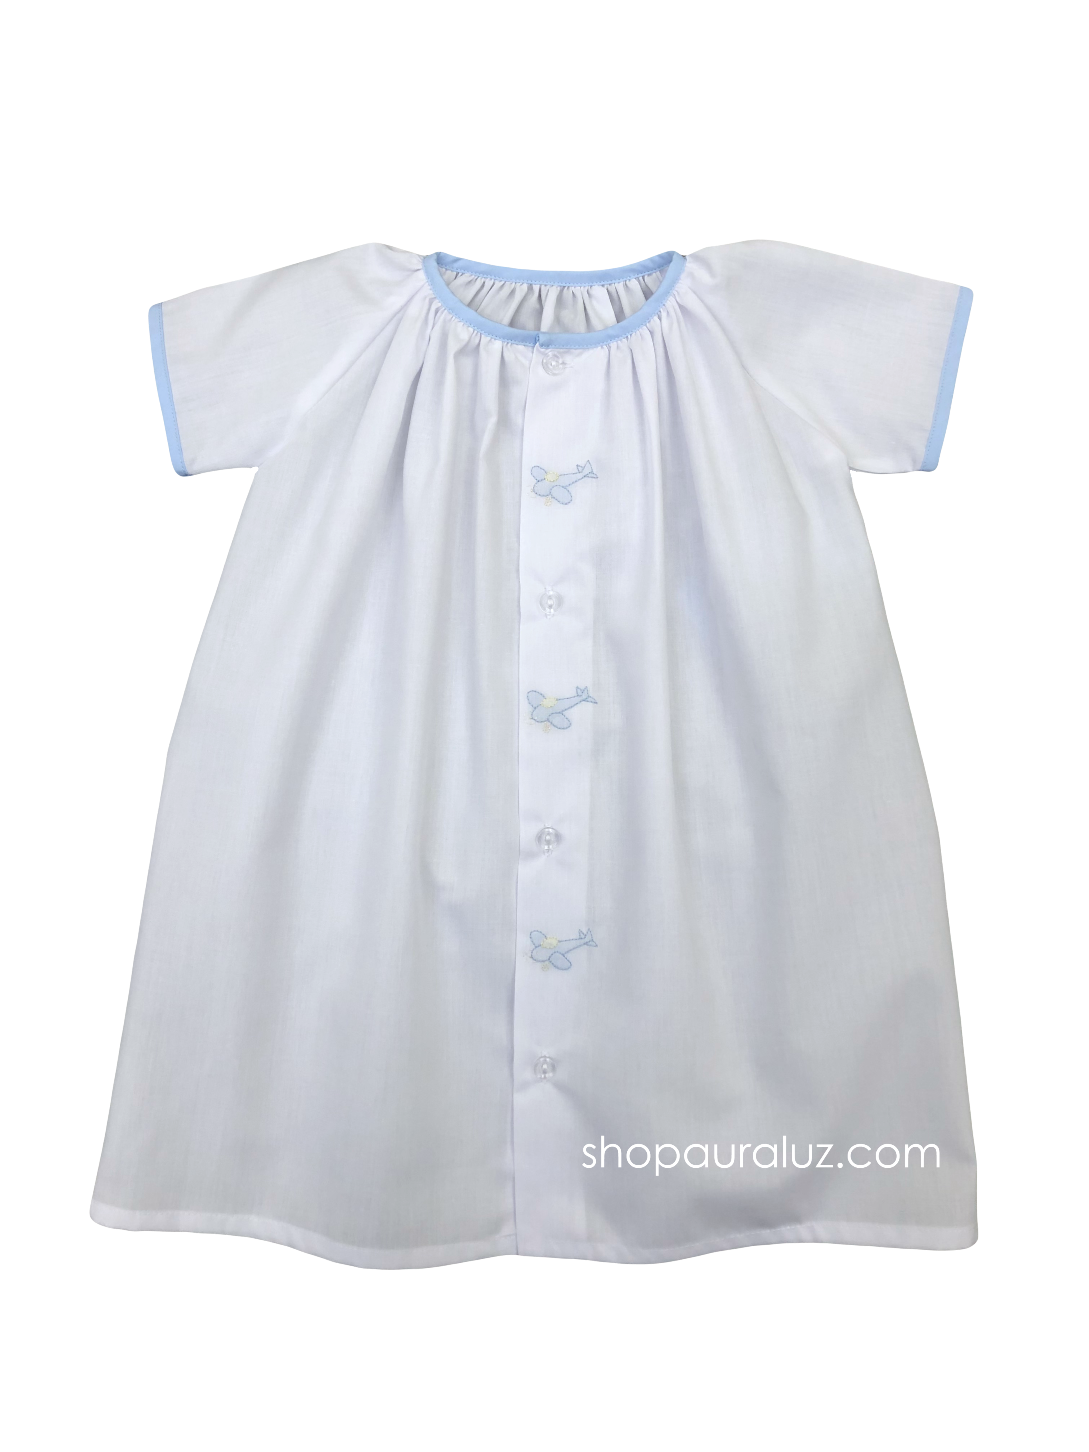 Auraluz Day Gown. White with blue binding trim and embroidered airplanes